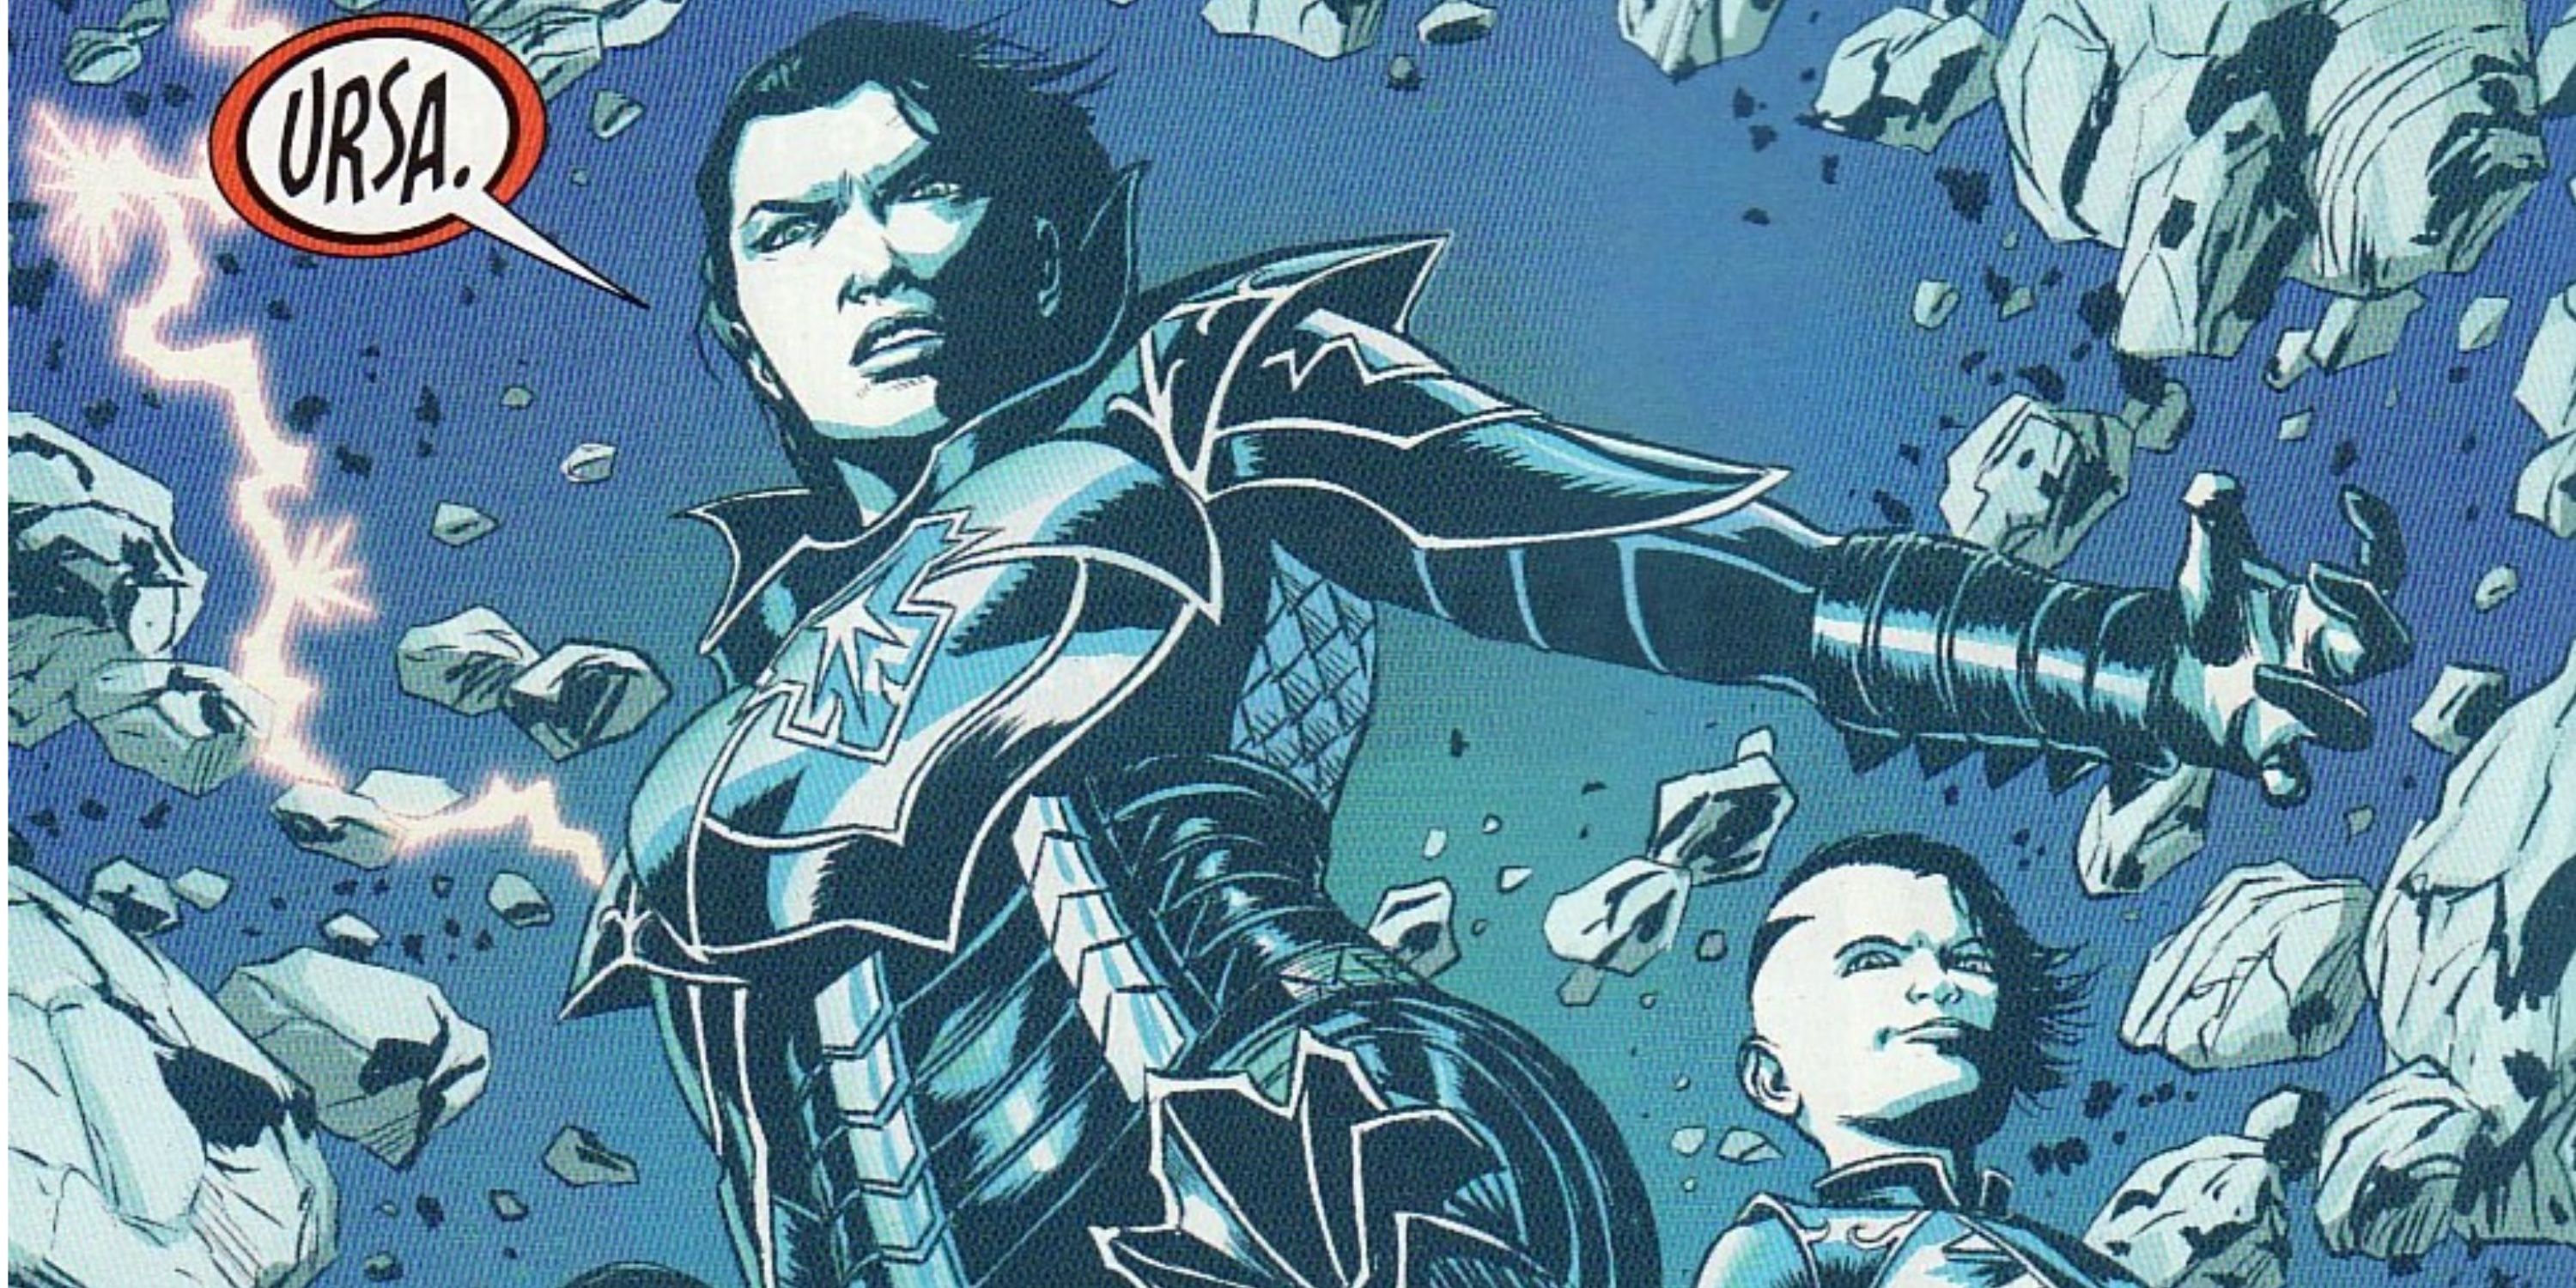 Ursa and her son Lor-Zod from DC Comics